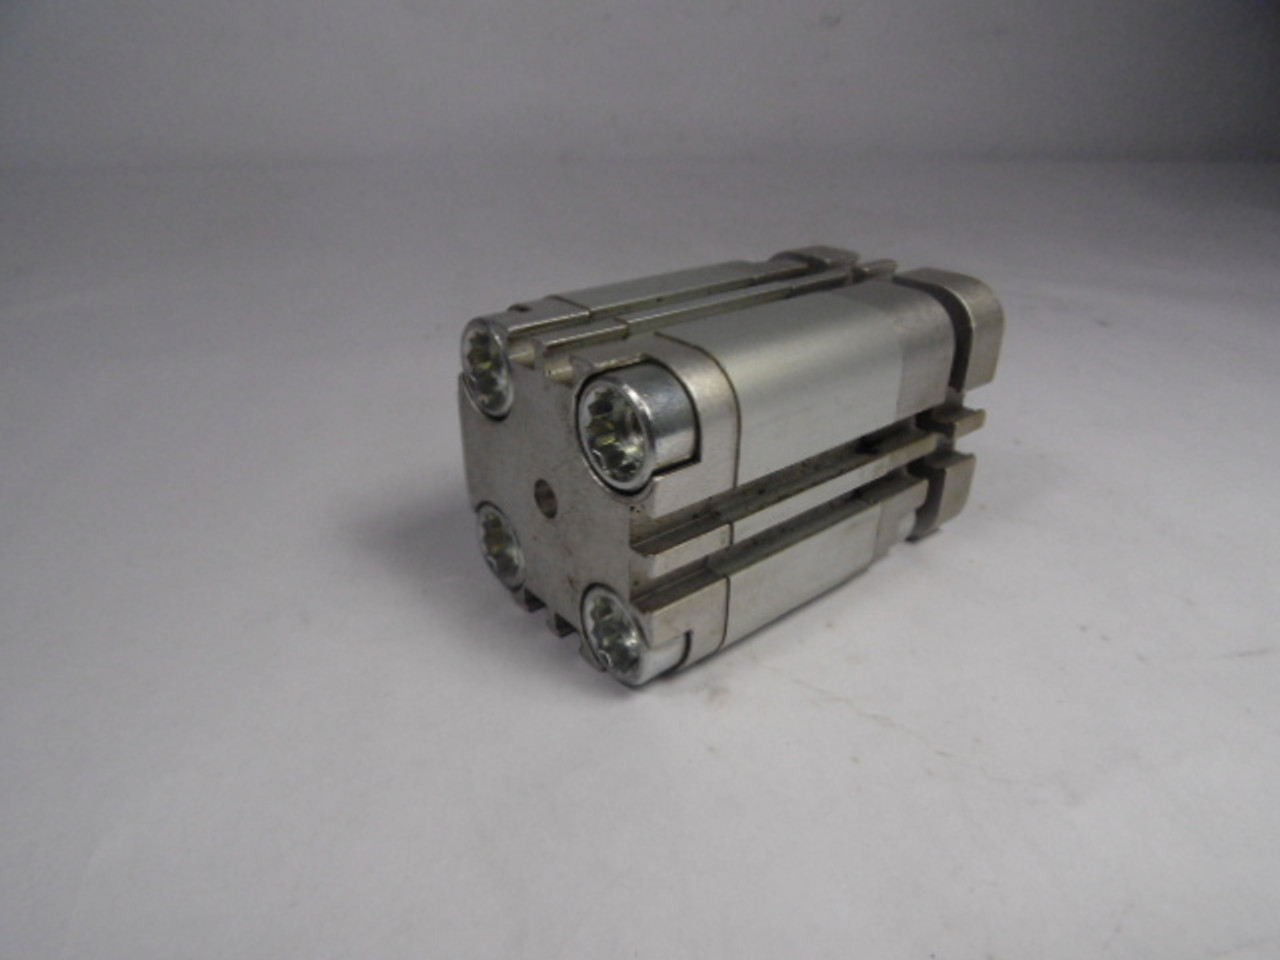 Festo ADVUL-32-20-P-A Compact Cylinder USED